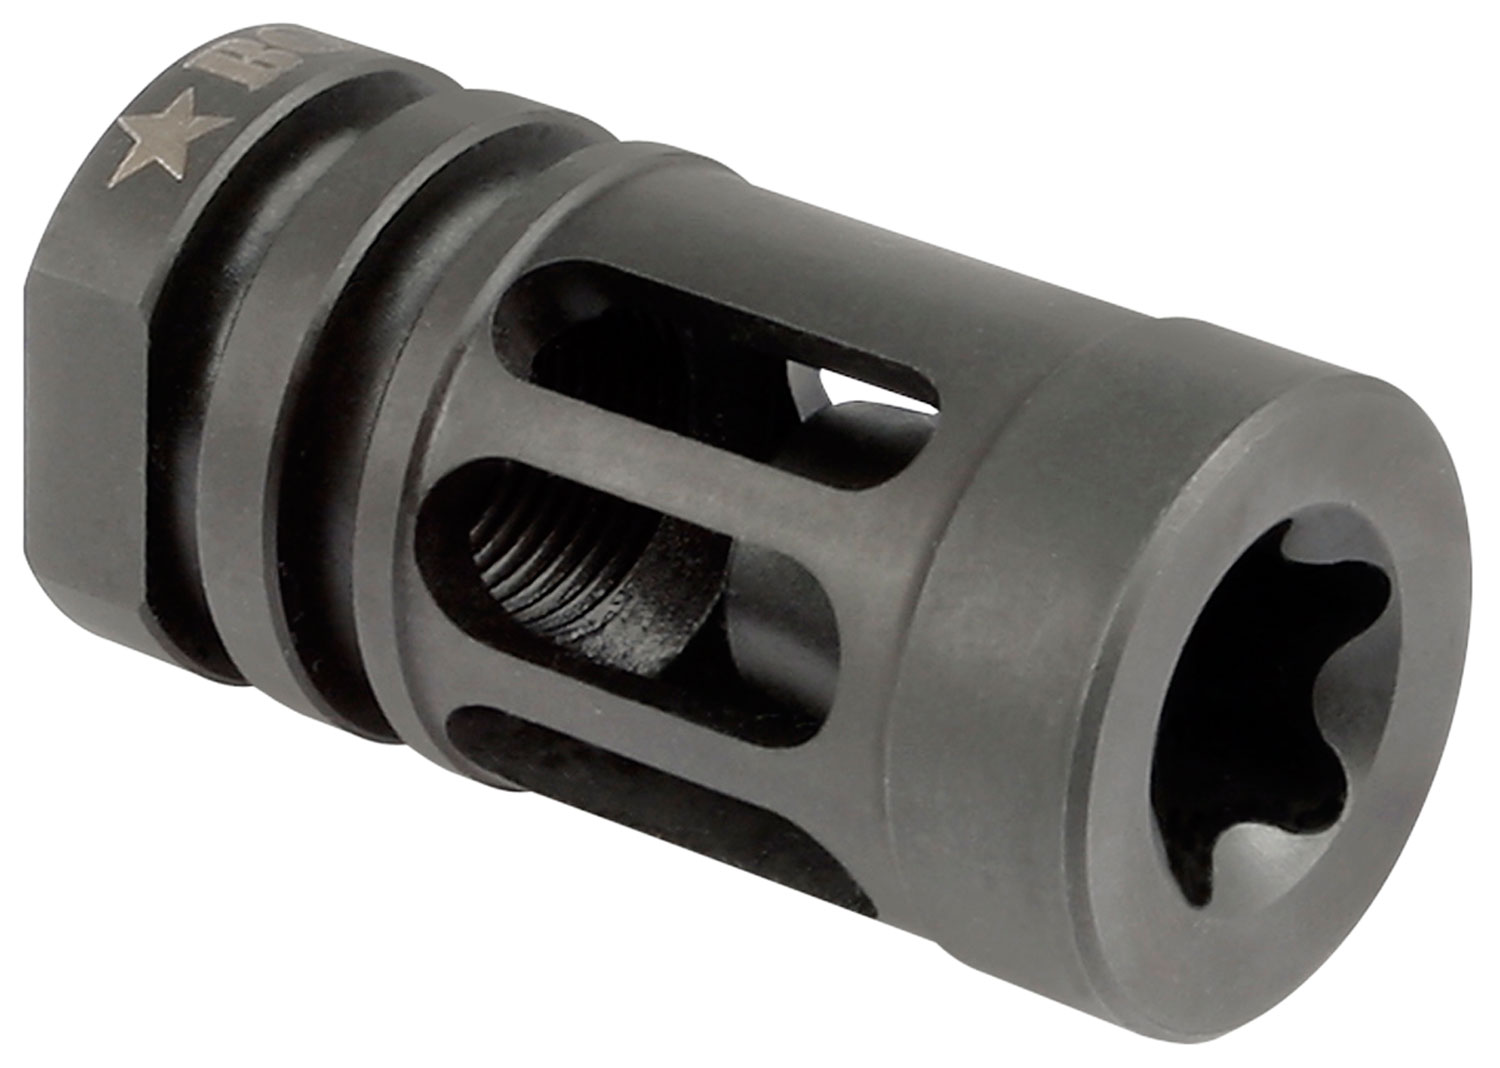 BCM GFCMOD0556 BCMGunfighter Compensator Mod 0 Black Nitride Stainless Steel with 1/2